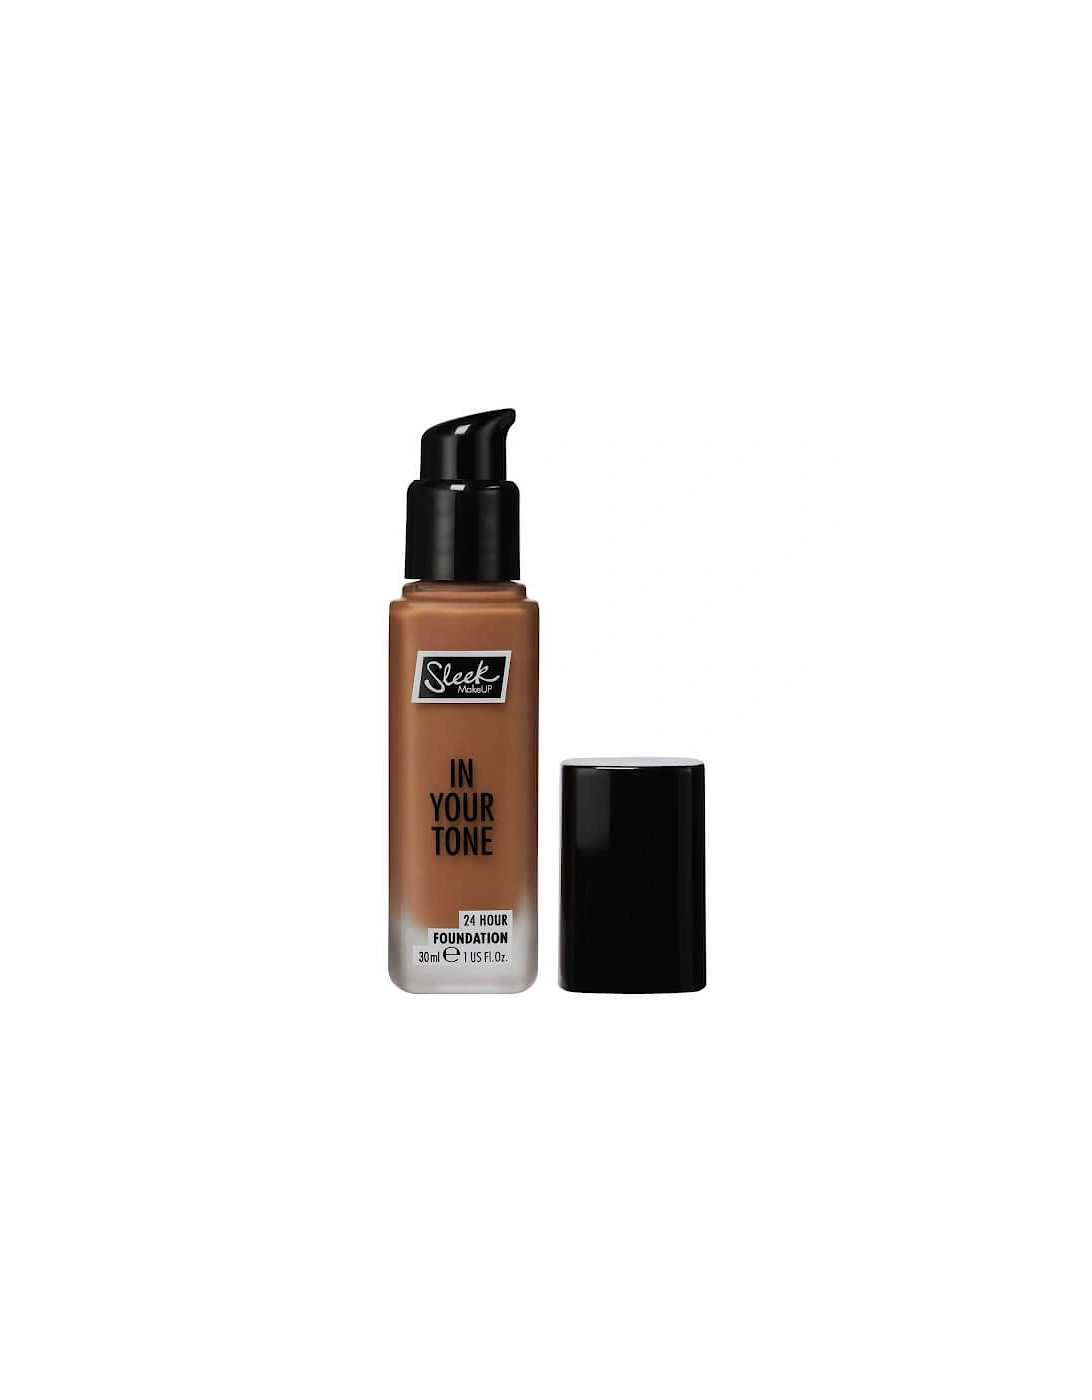 in Your Tone 24 Hour Foundation - 10N, 2 of 1